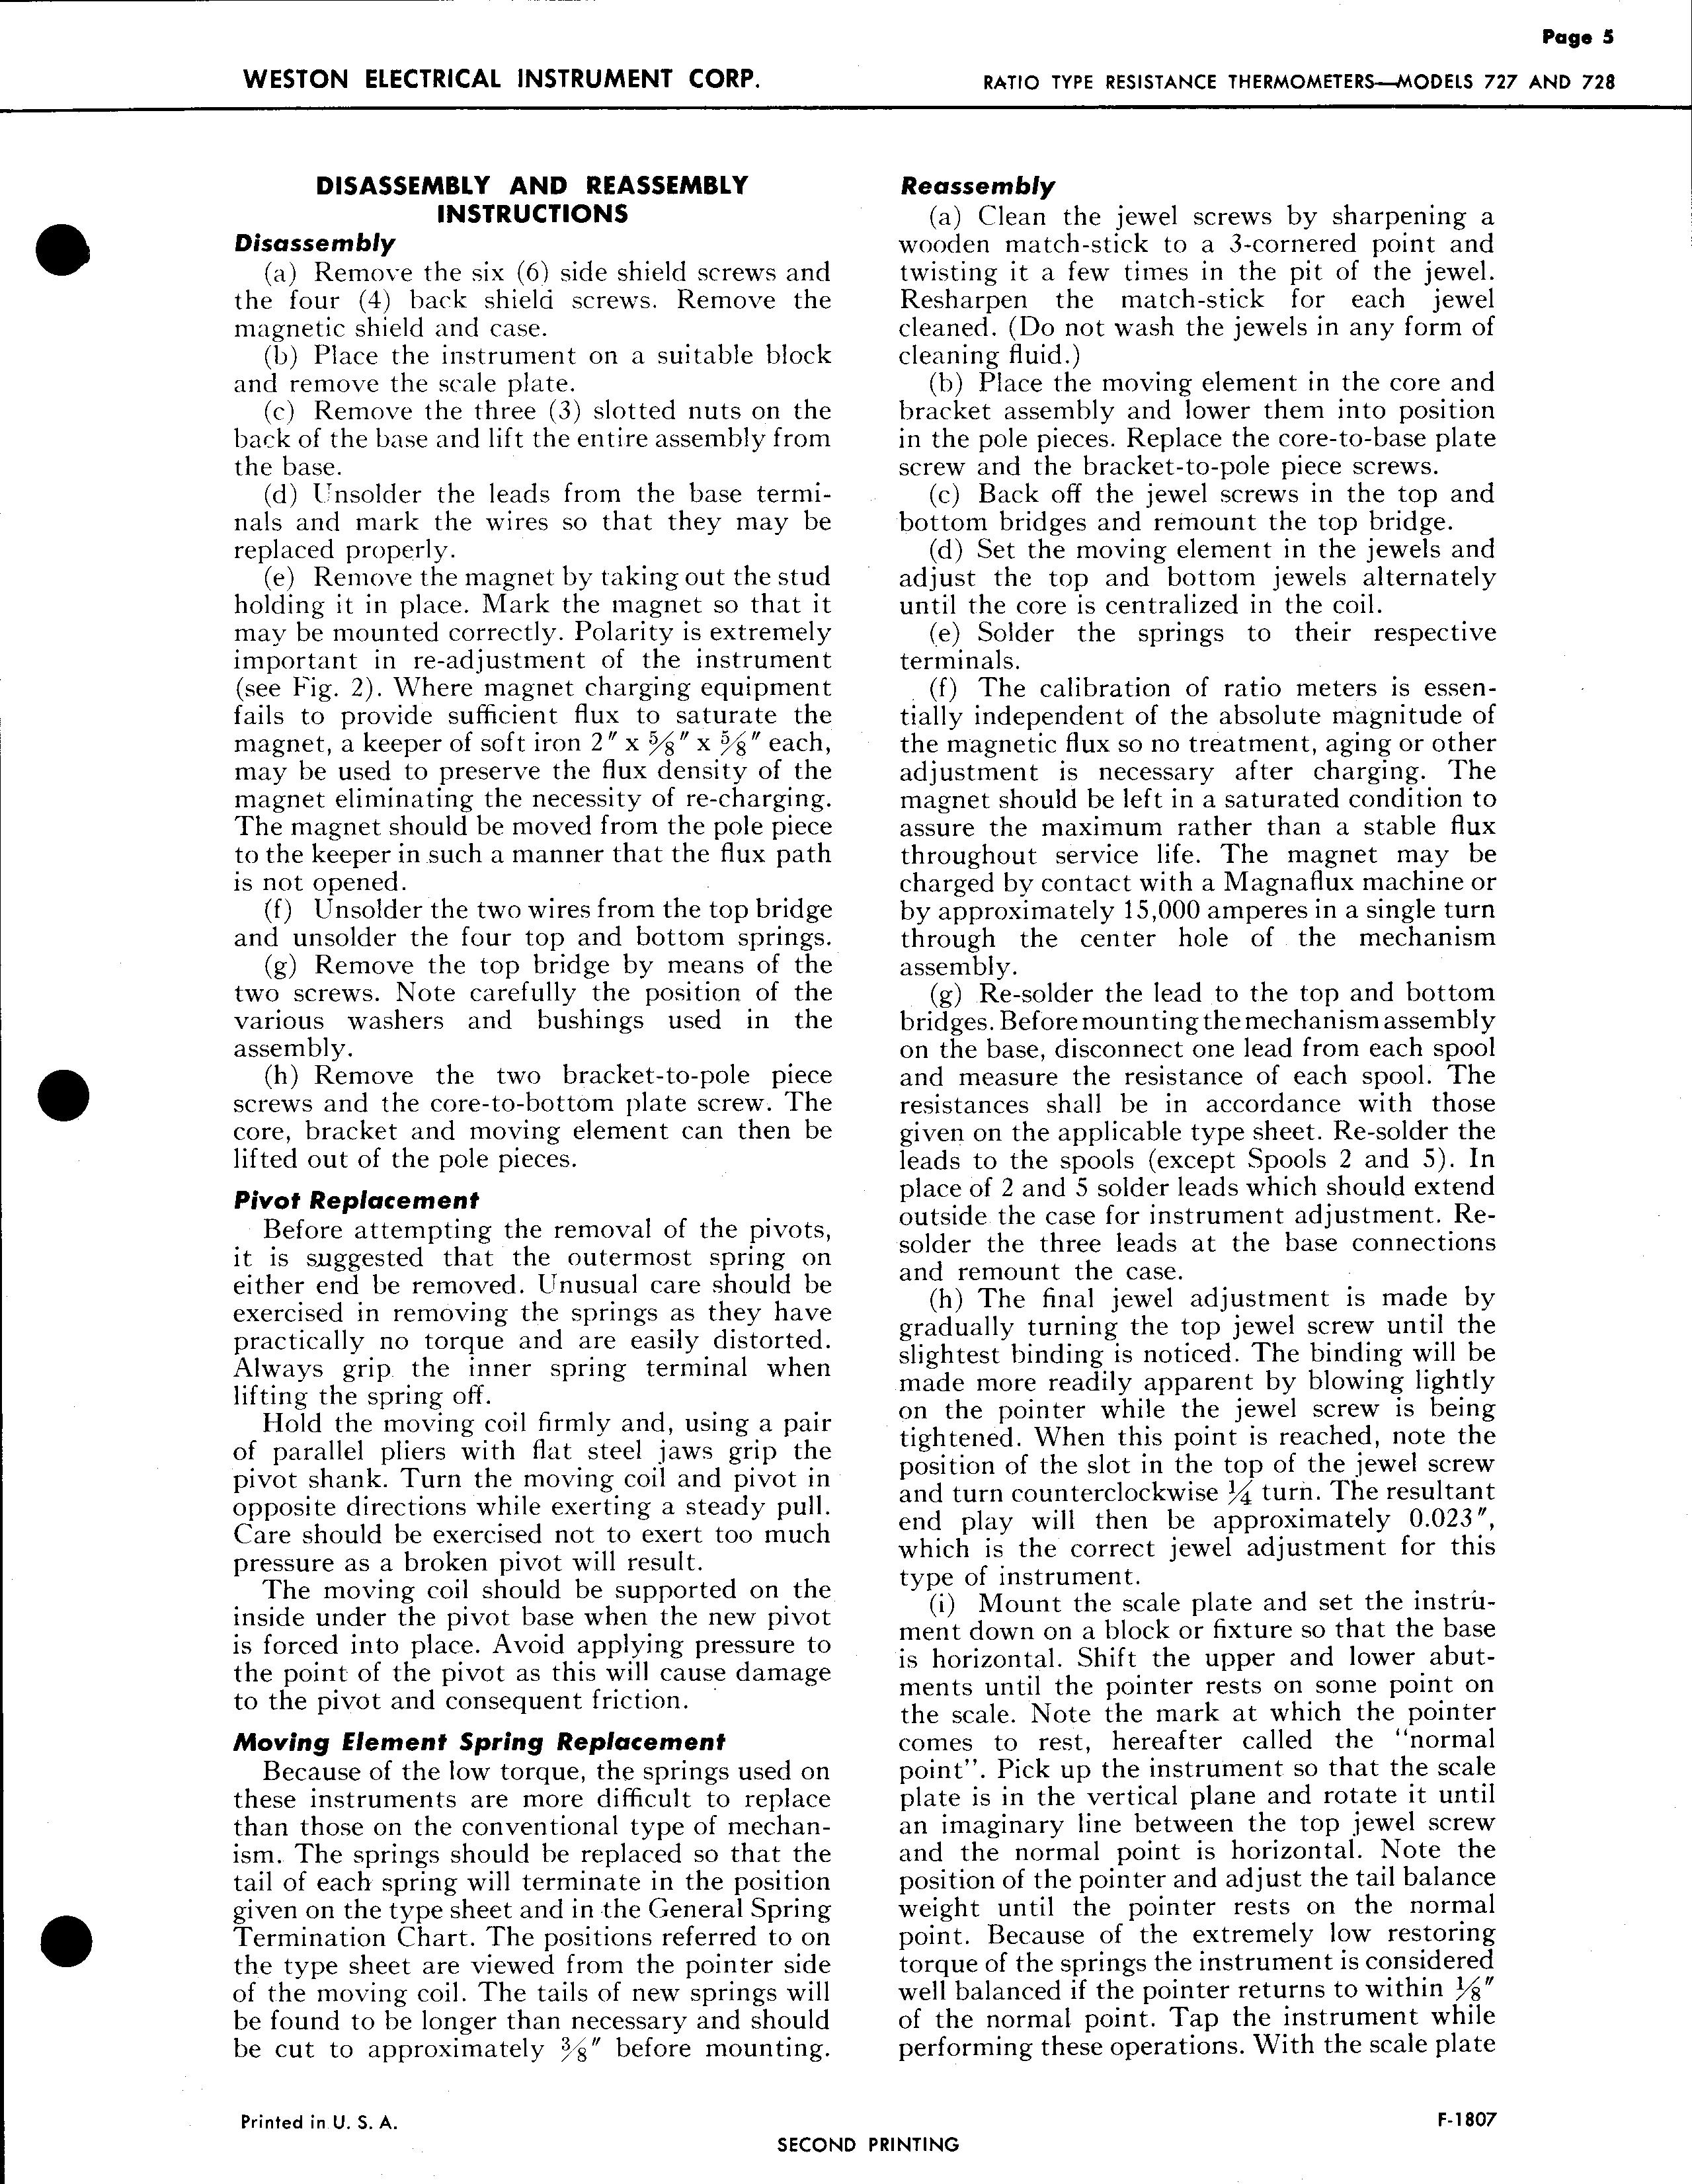 Sample page 5 from AirCorps Library document: Service Instructions for Models 727 & 728 Ratio Type Resistance Thermometers